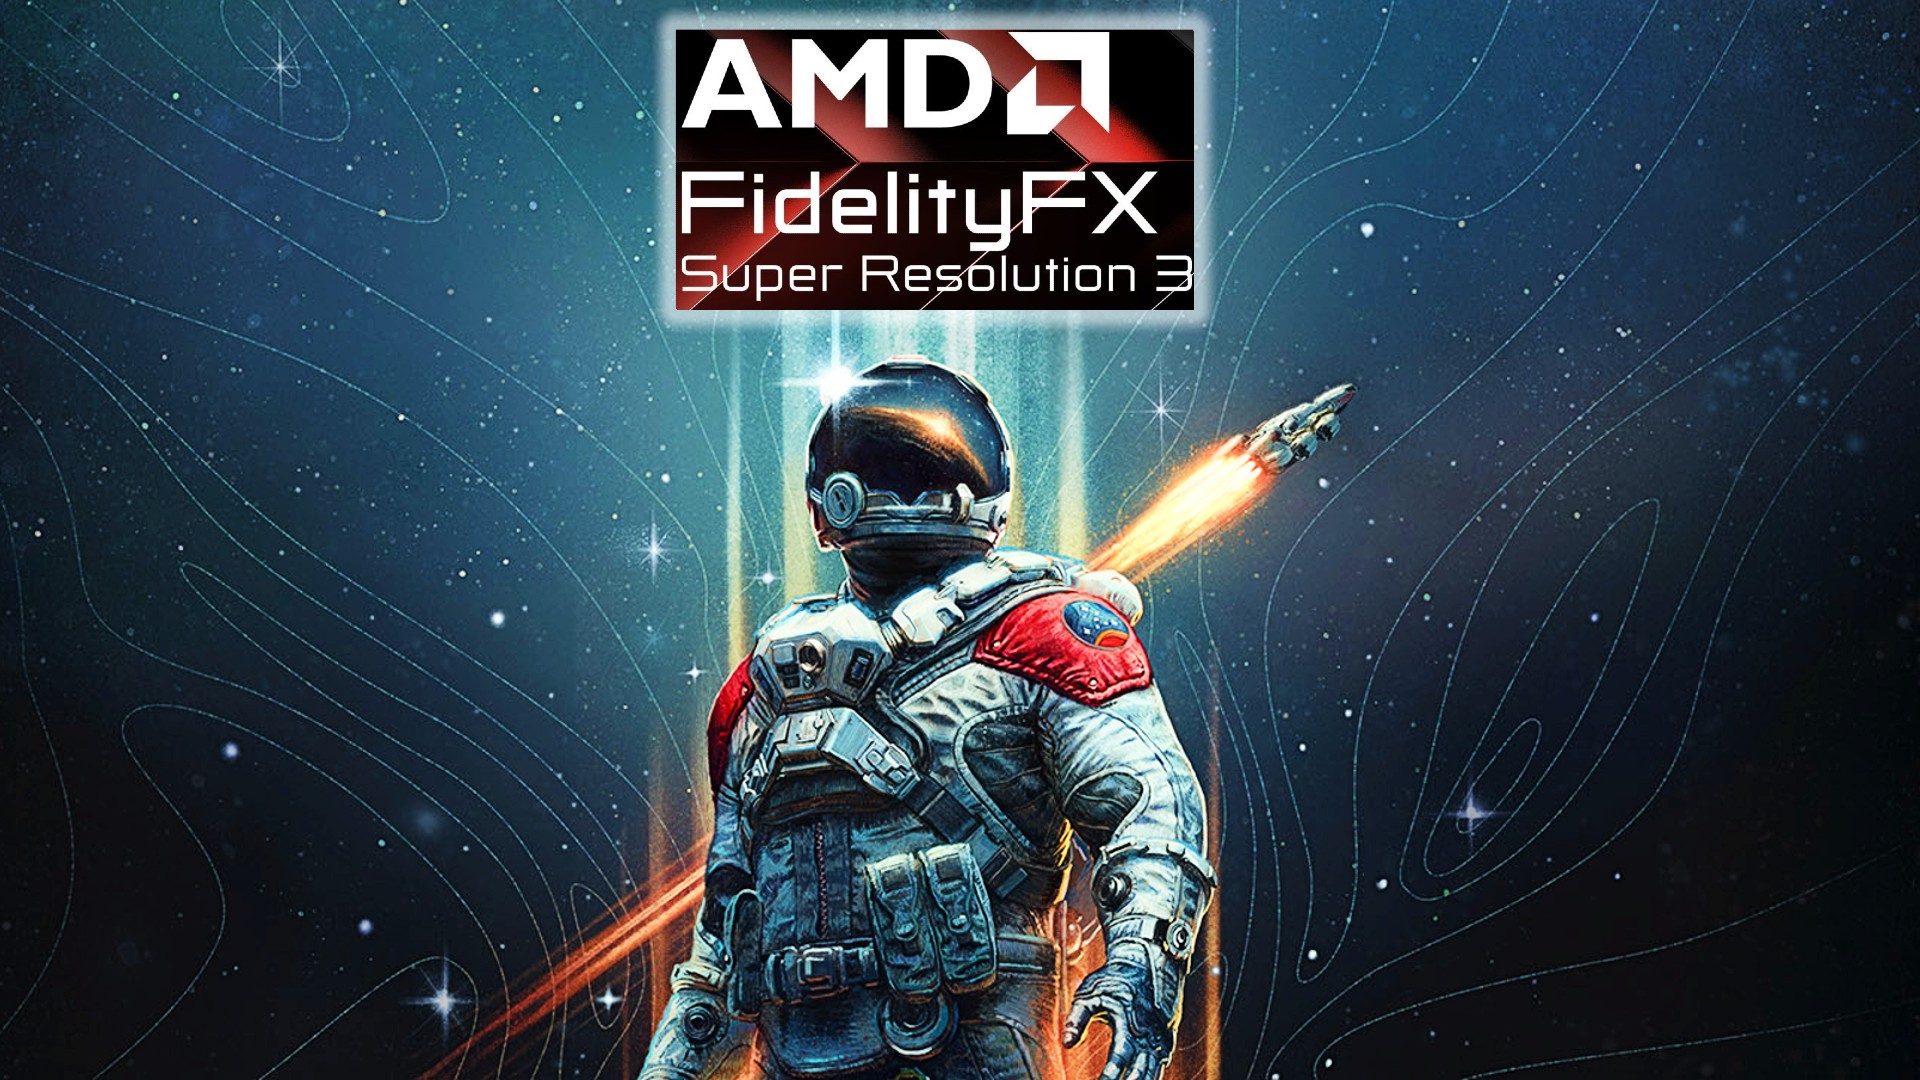 AMD FSR 3 is coming to save Starfield for budget gamers